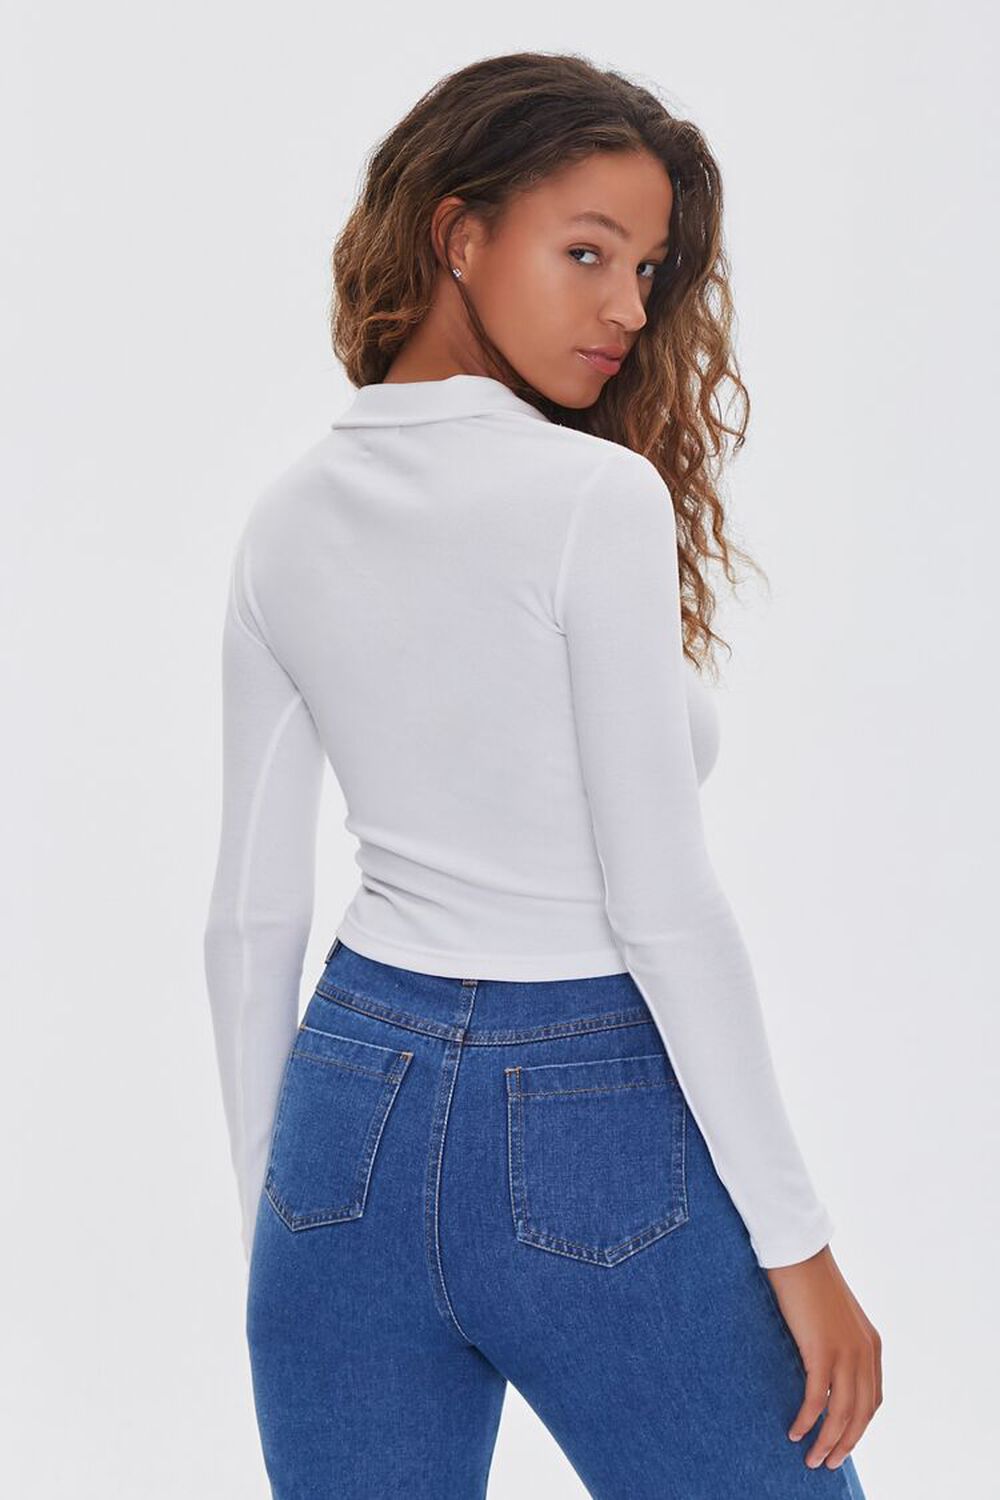 Collared Long Sleeve Top